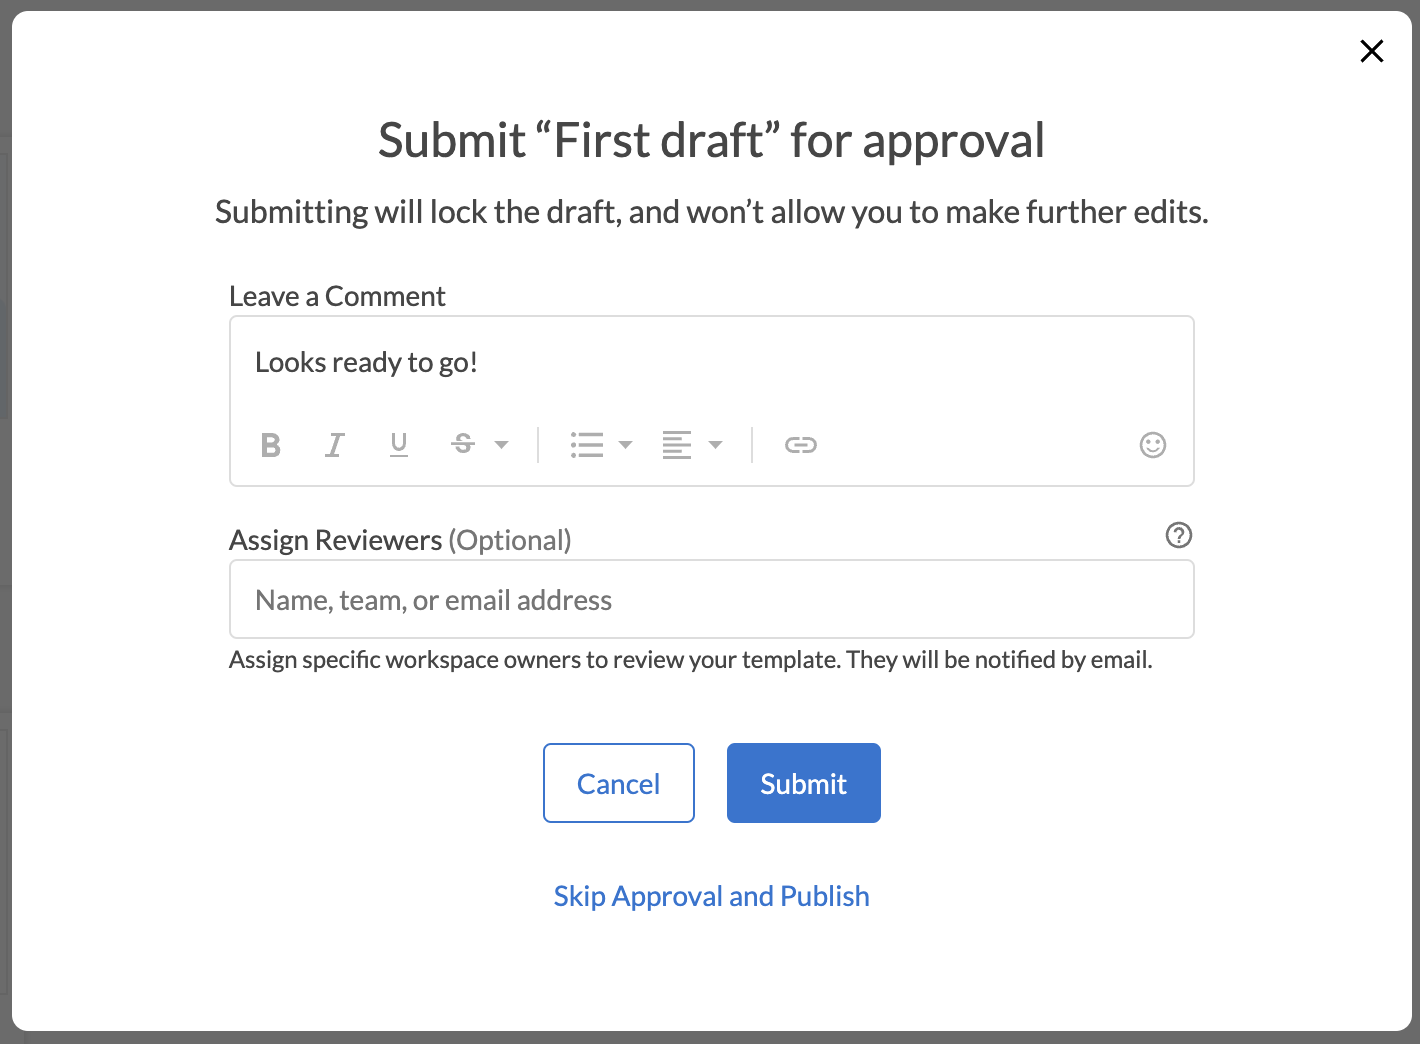 Inside the testing suite, select Submit for Approval to get your team to come review a template